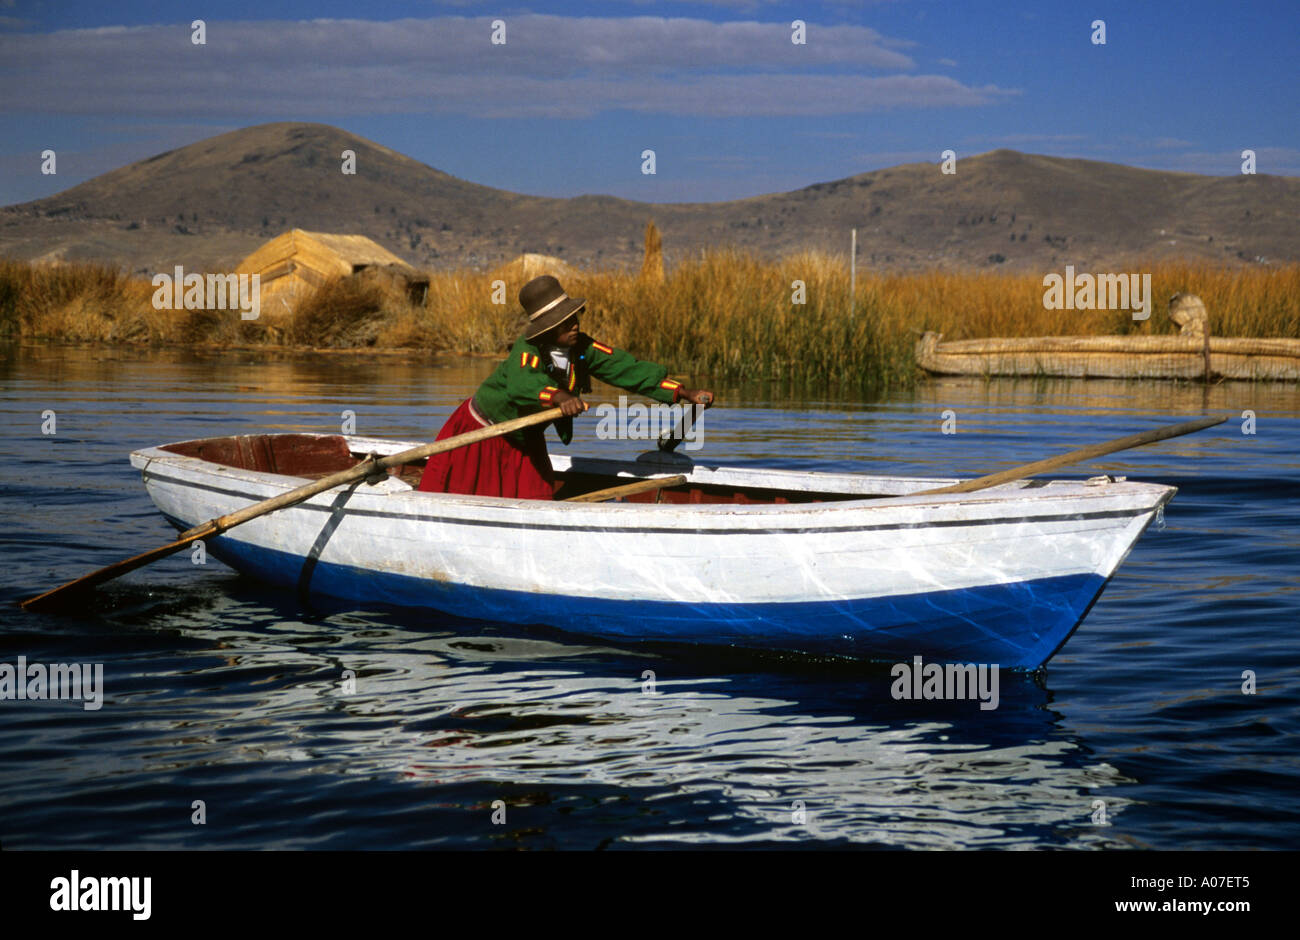 Rowing boat on Lake Titicaca, Uros Floating Islands, Peru Stock Photo